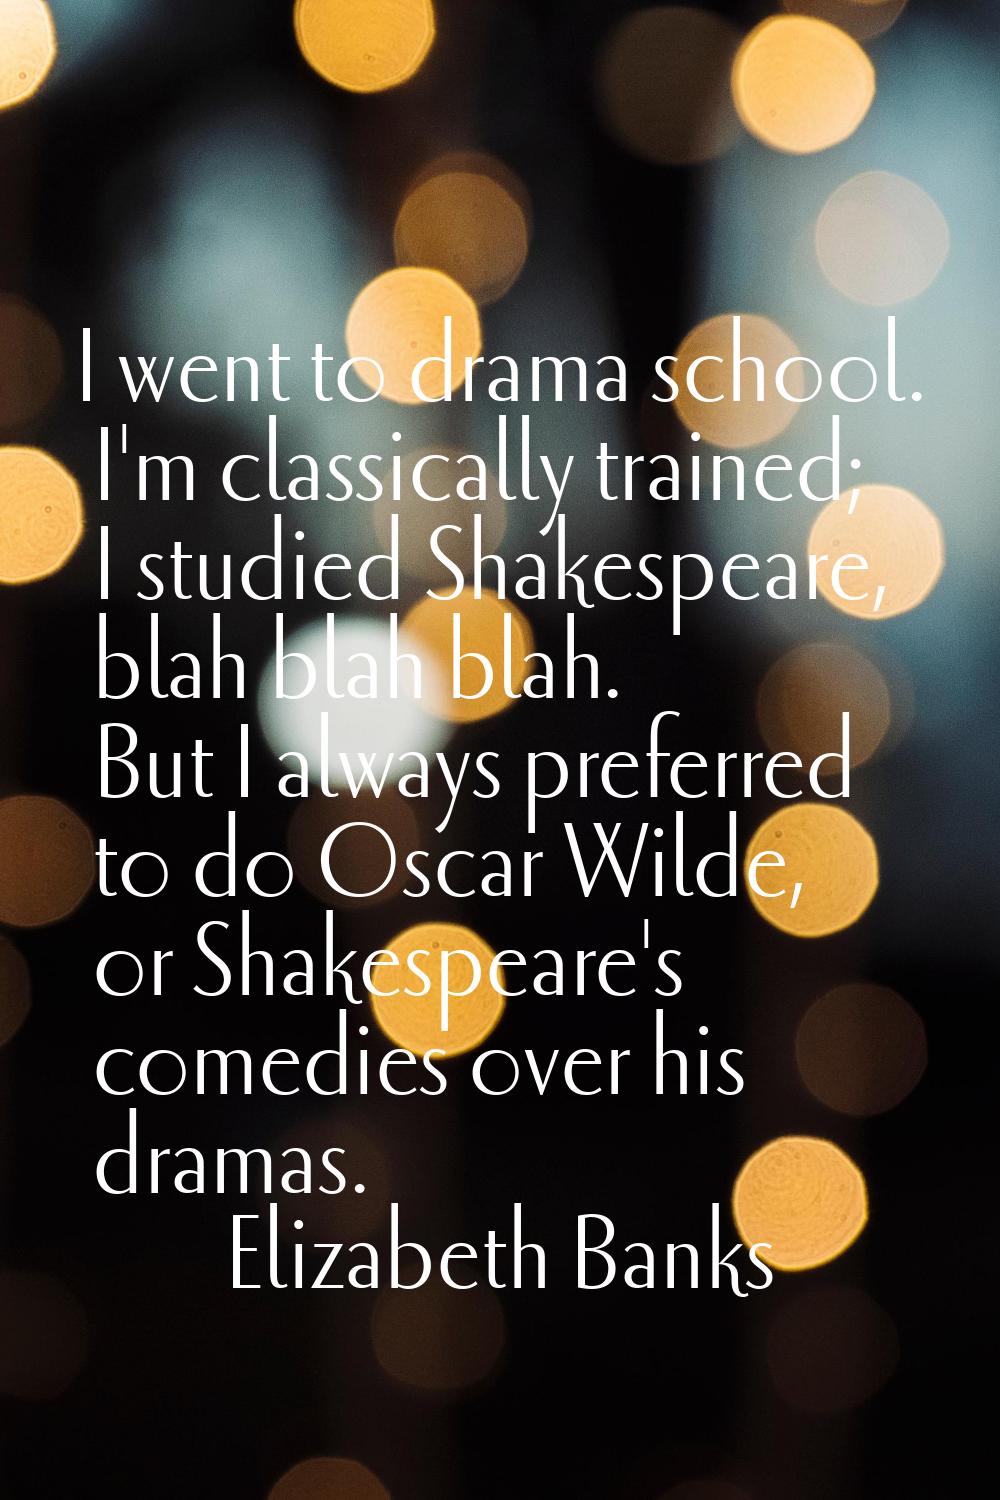 I went to drama school. I'm classically trained; I studied Shakespeare, blah blah blah. But I alway